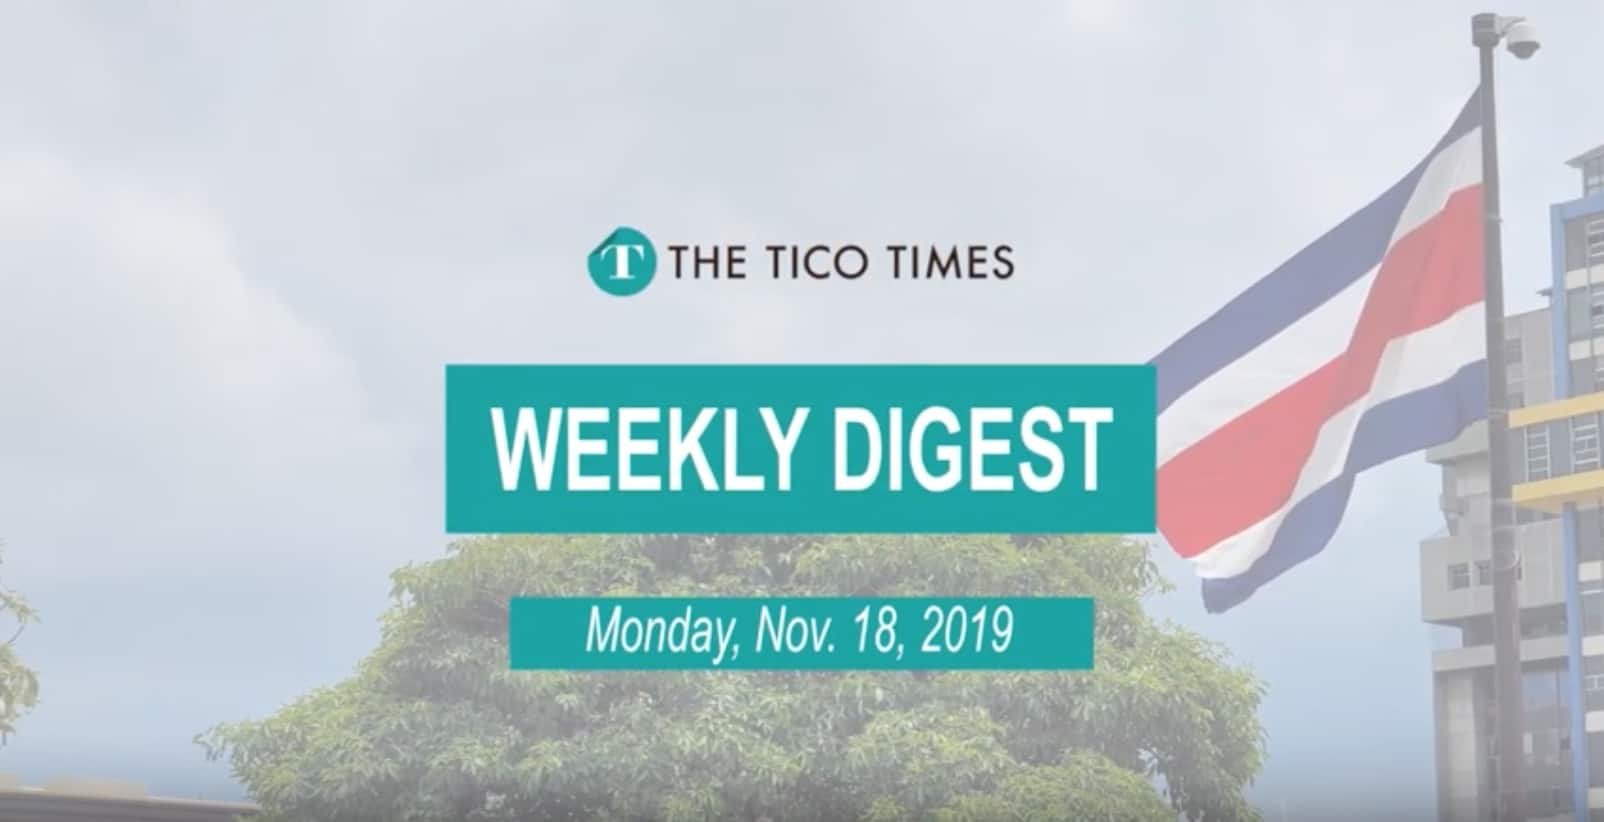 The Tico Times Weekly Digest